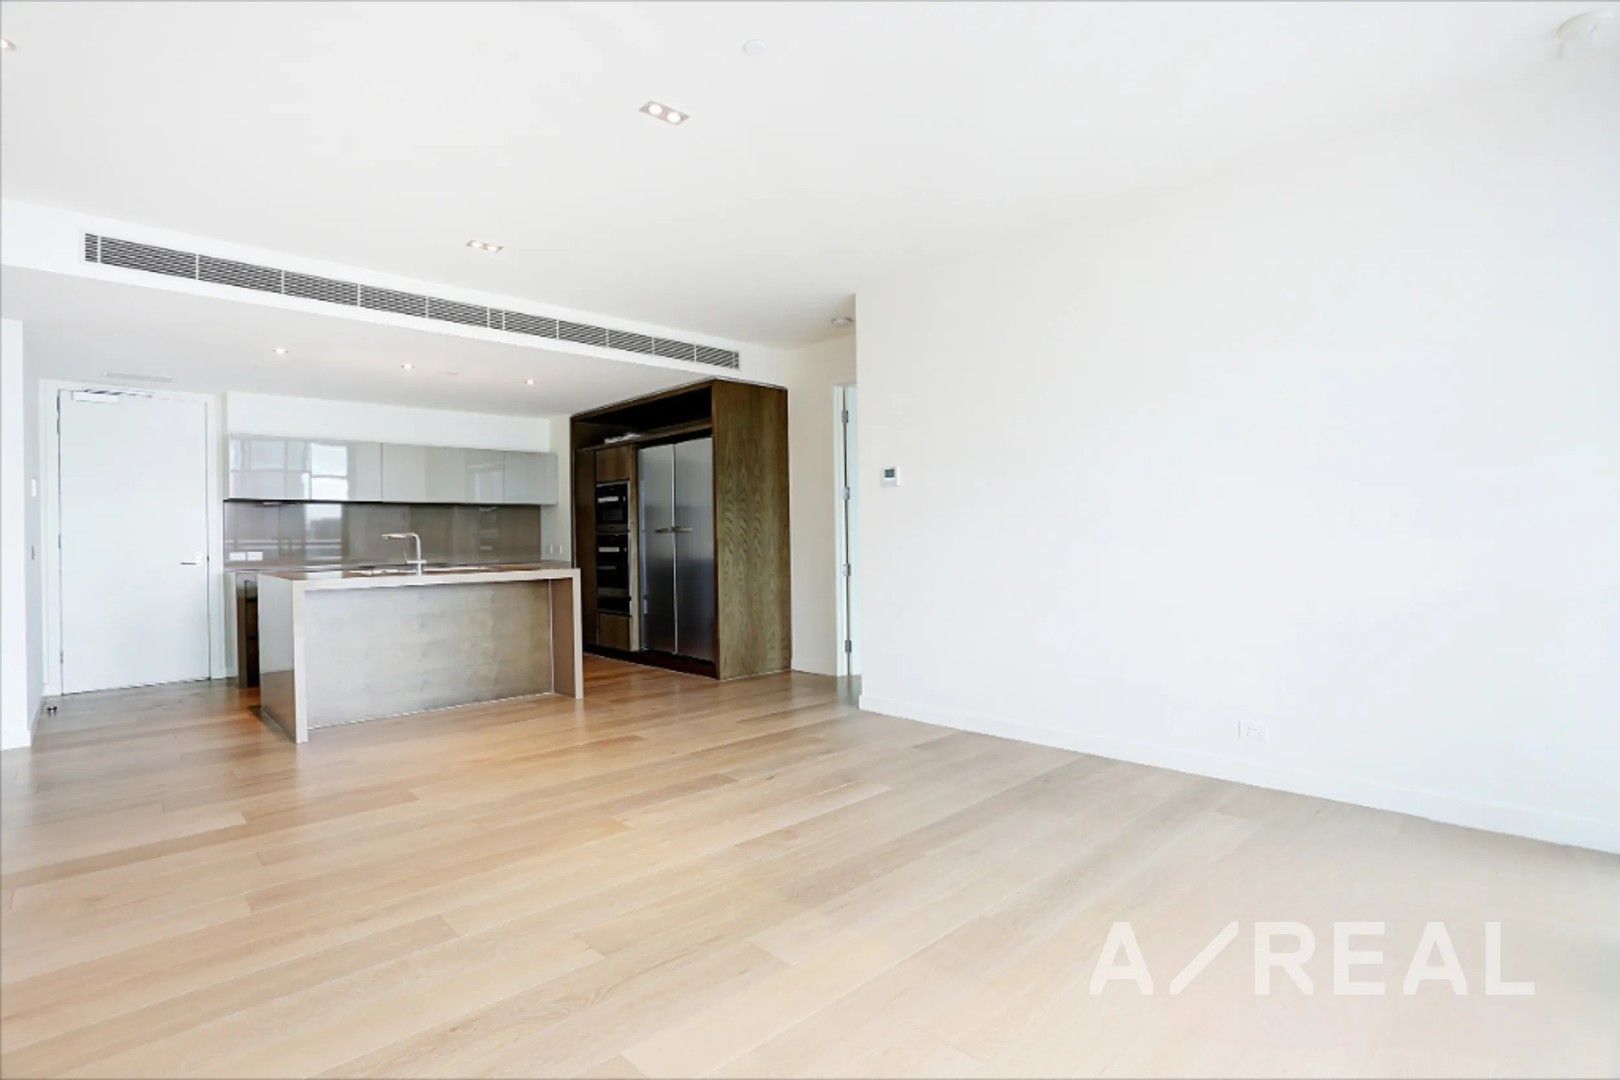 43M/9 Waterside Place, Docklands VIC 3008, Image 0